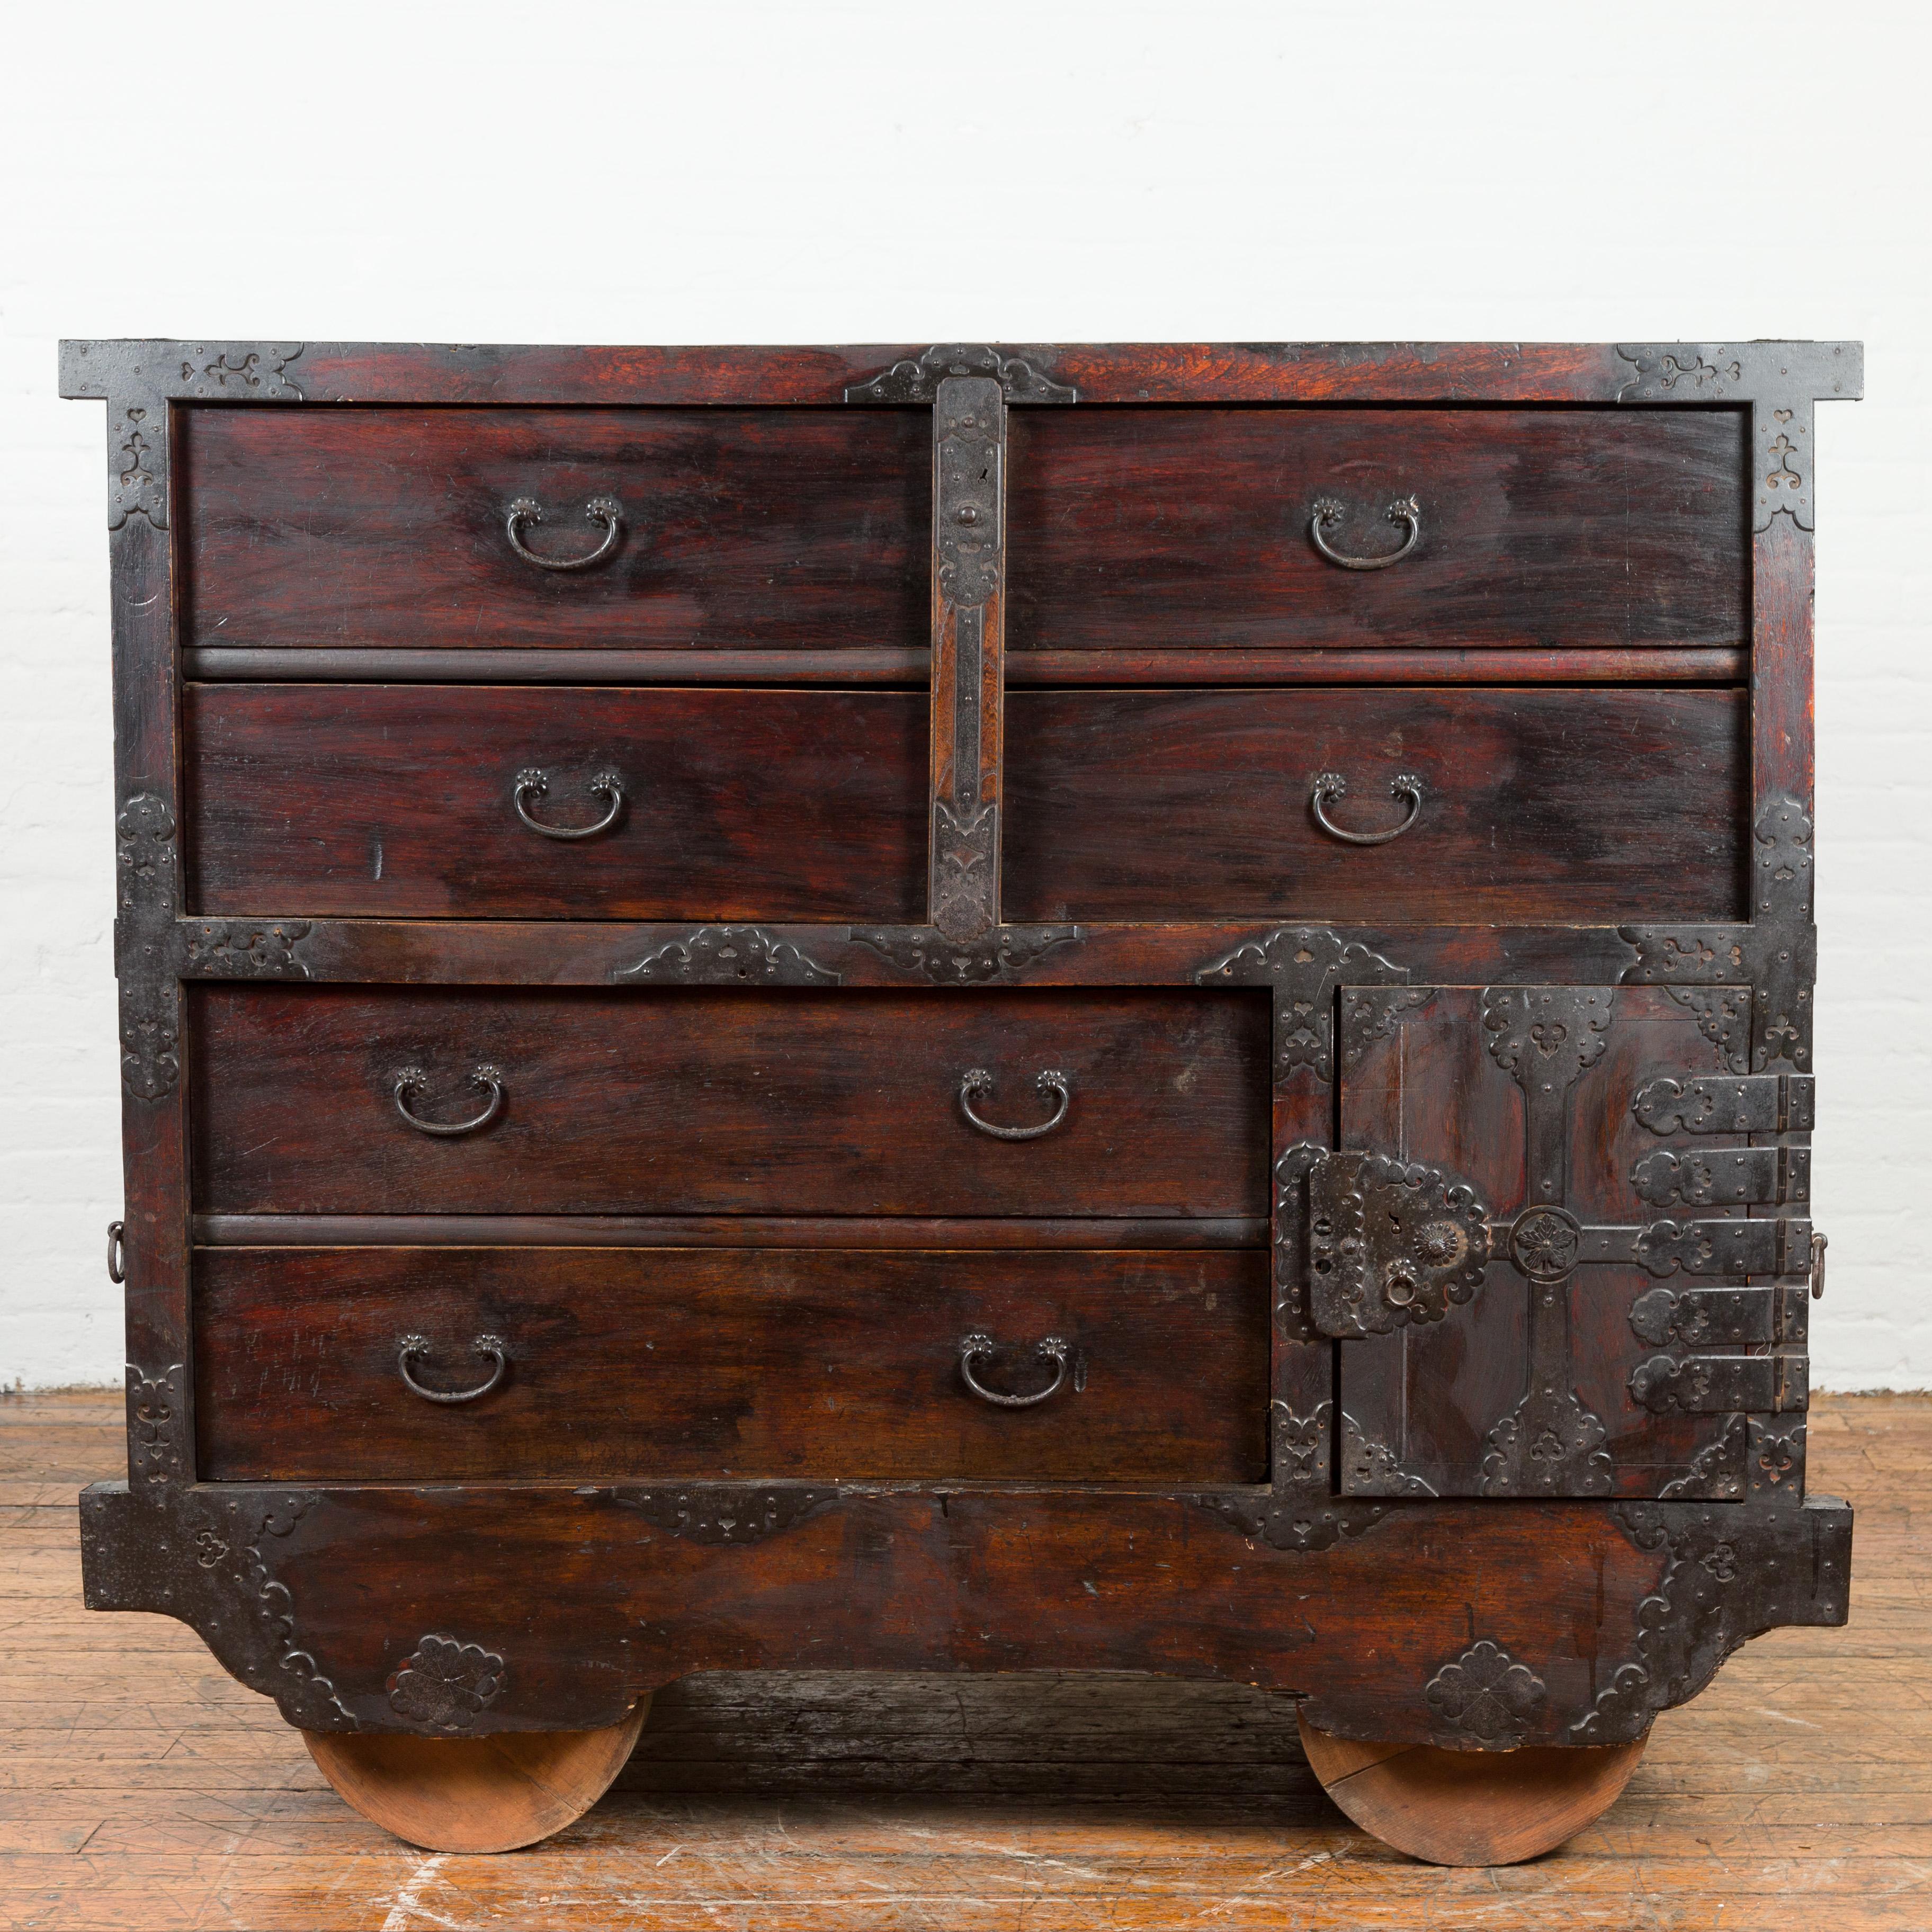 A Japanese Meiji period merchant's chest on wheels from the late 19th century, with safe and iron hardware mounted on wheels. Created in Japan during the later years of the 19th century, this merchant's chest features six large drawers and a safe